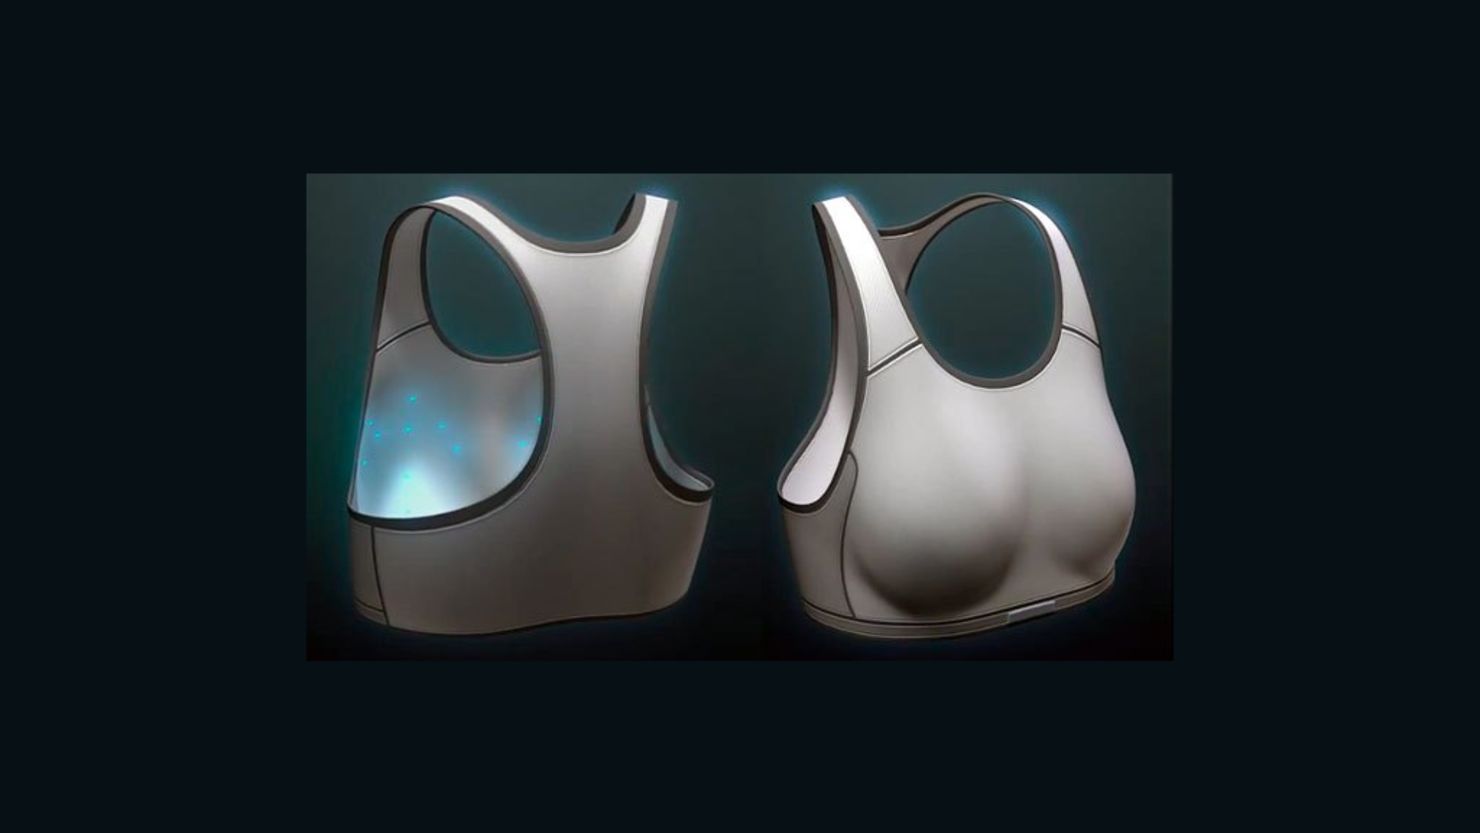      The makers of a new bra say sensors inside detect temperature changes that could mean cancer cells forming.